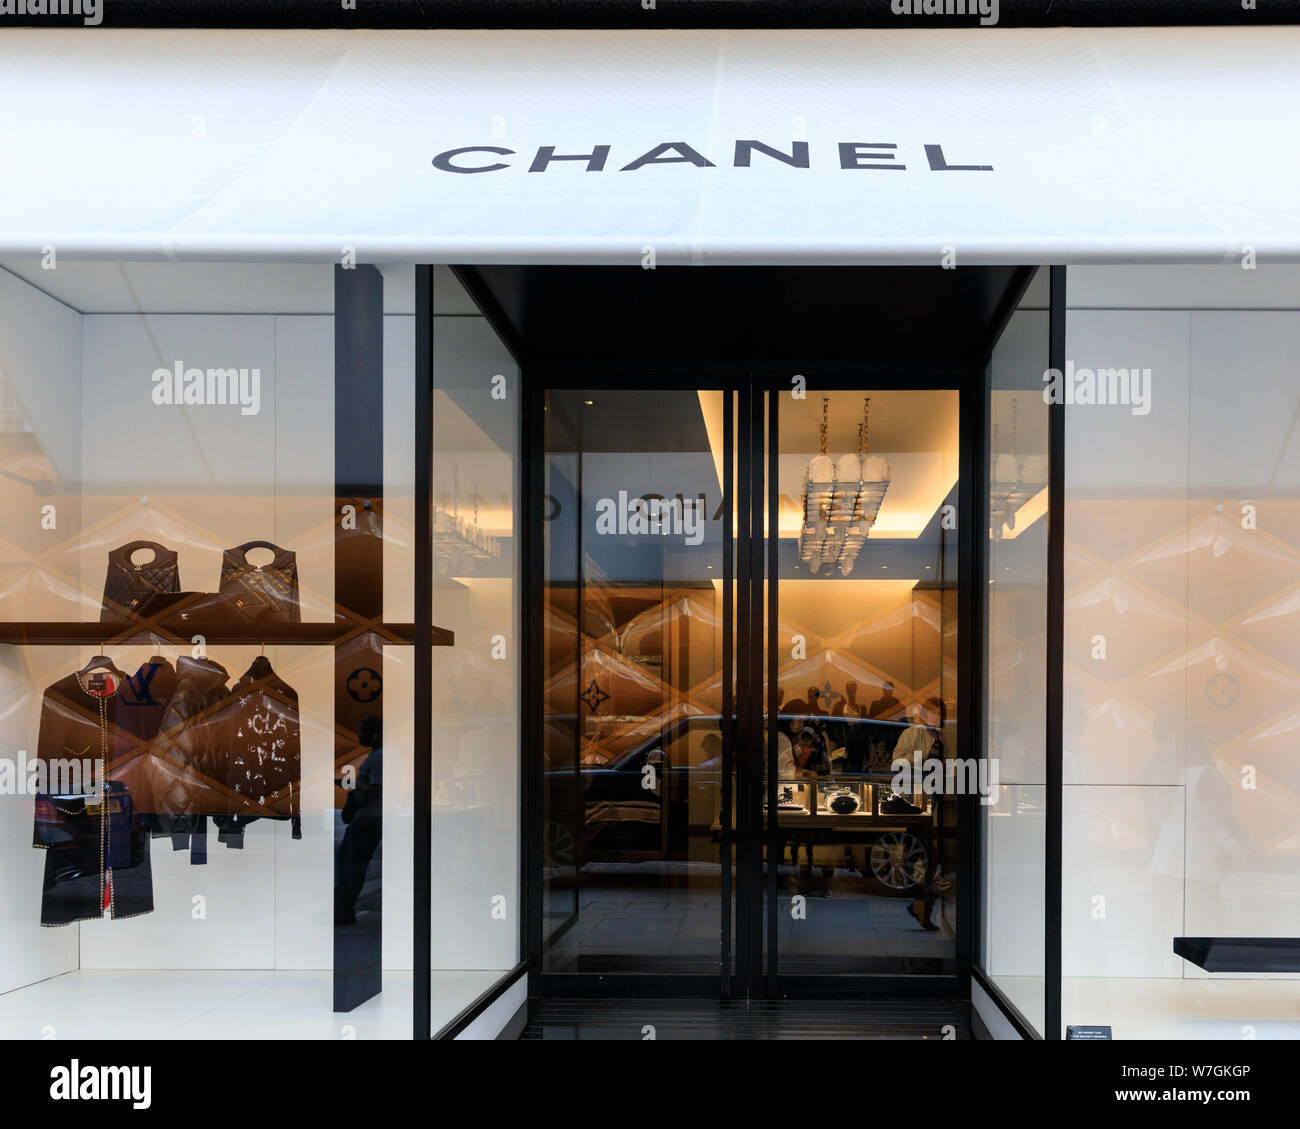 Chanel logo is seen at one of their stores on New Bond Street in